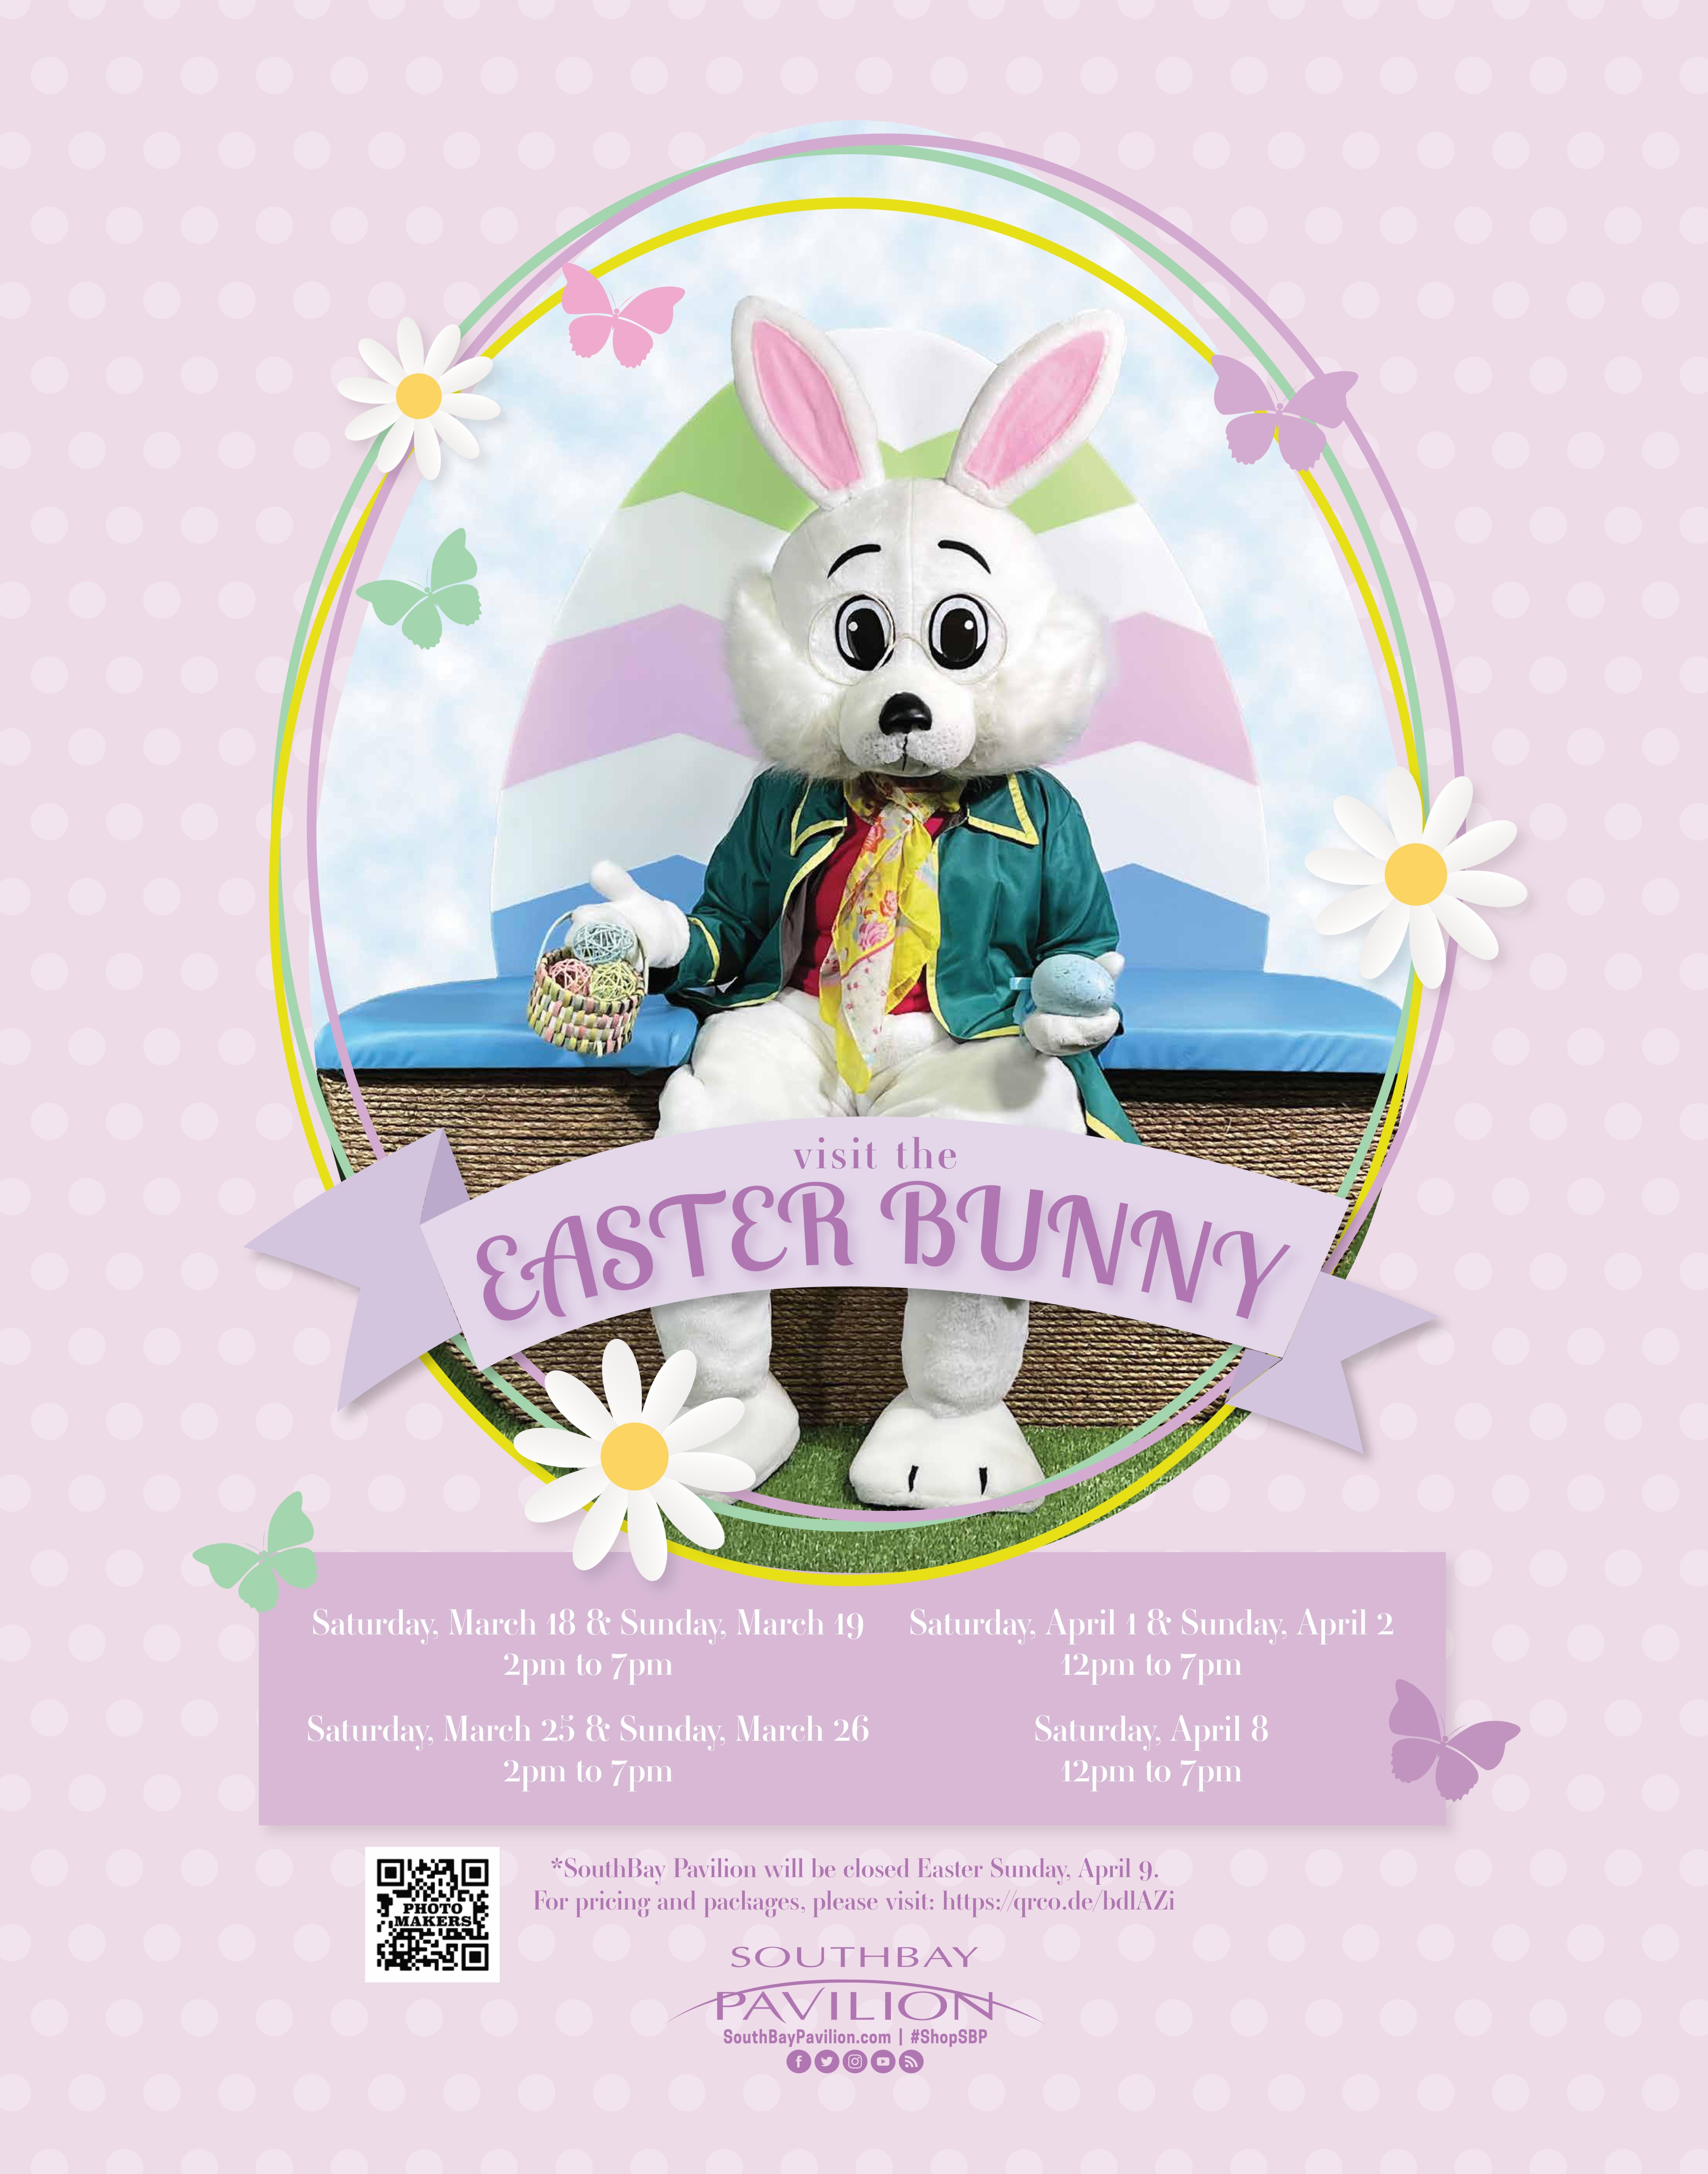 Easter Bunny Photos, Los Angeles, California, United States